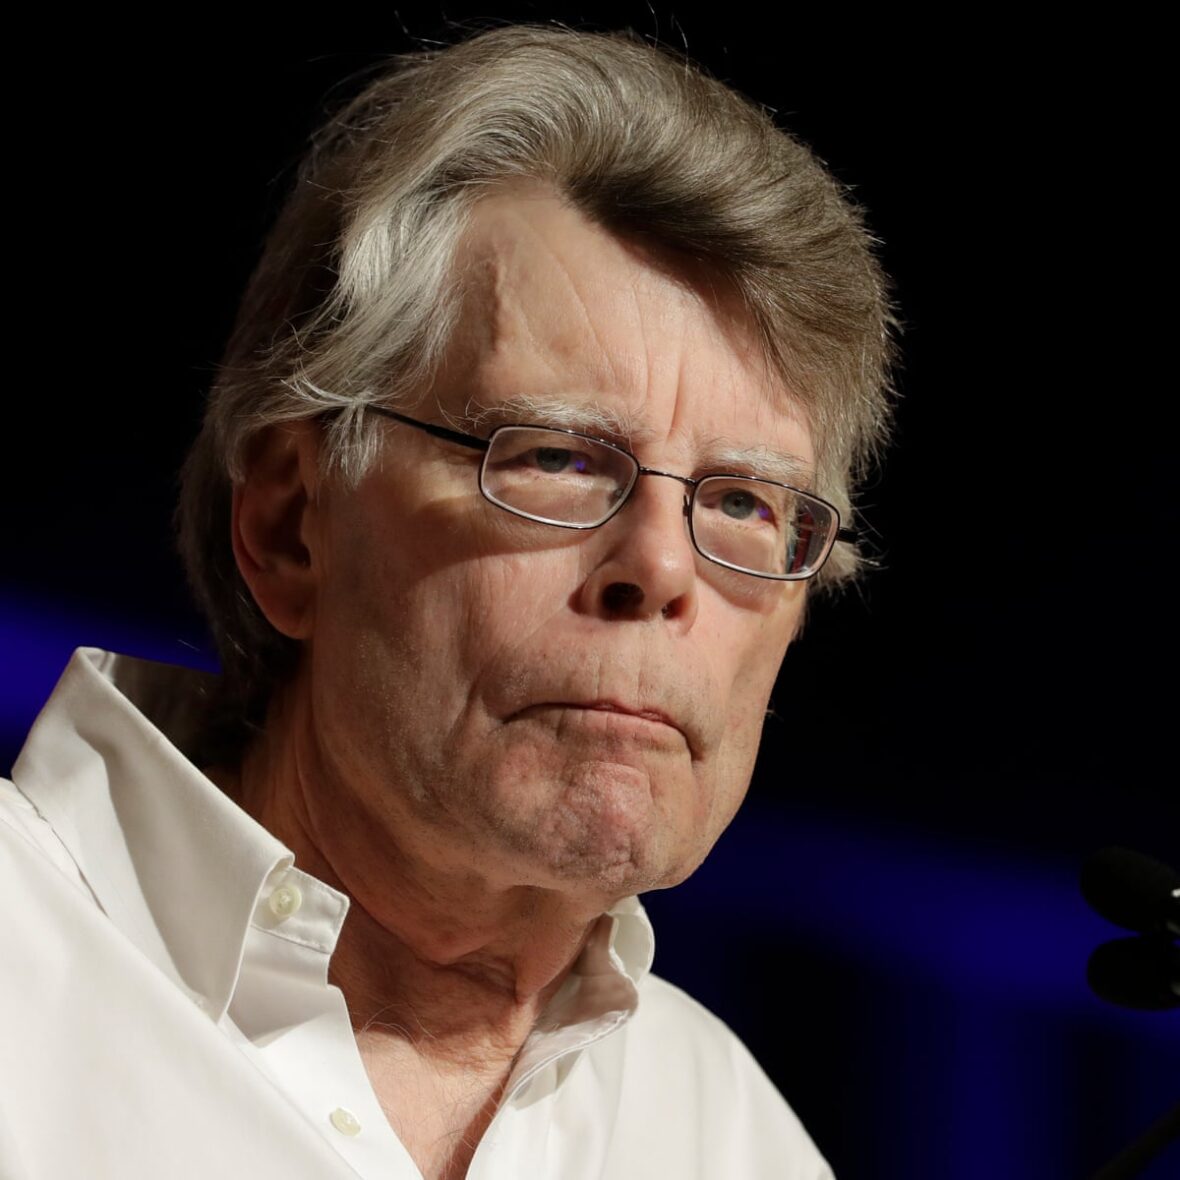 Stephen King Net Worth, Age, Height, Weight, Early Life, Career, Bio